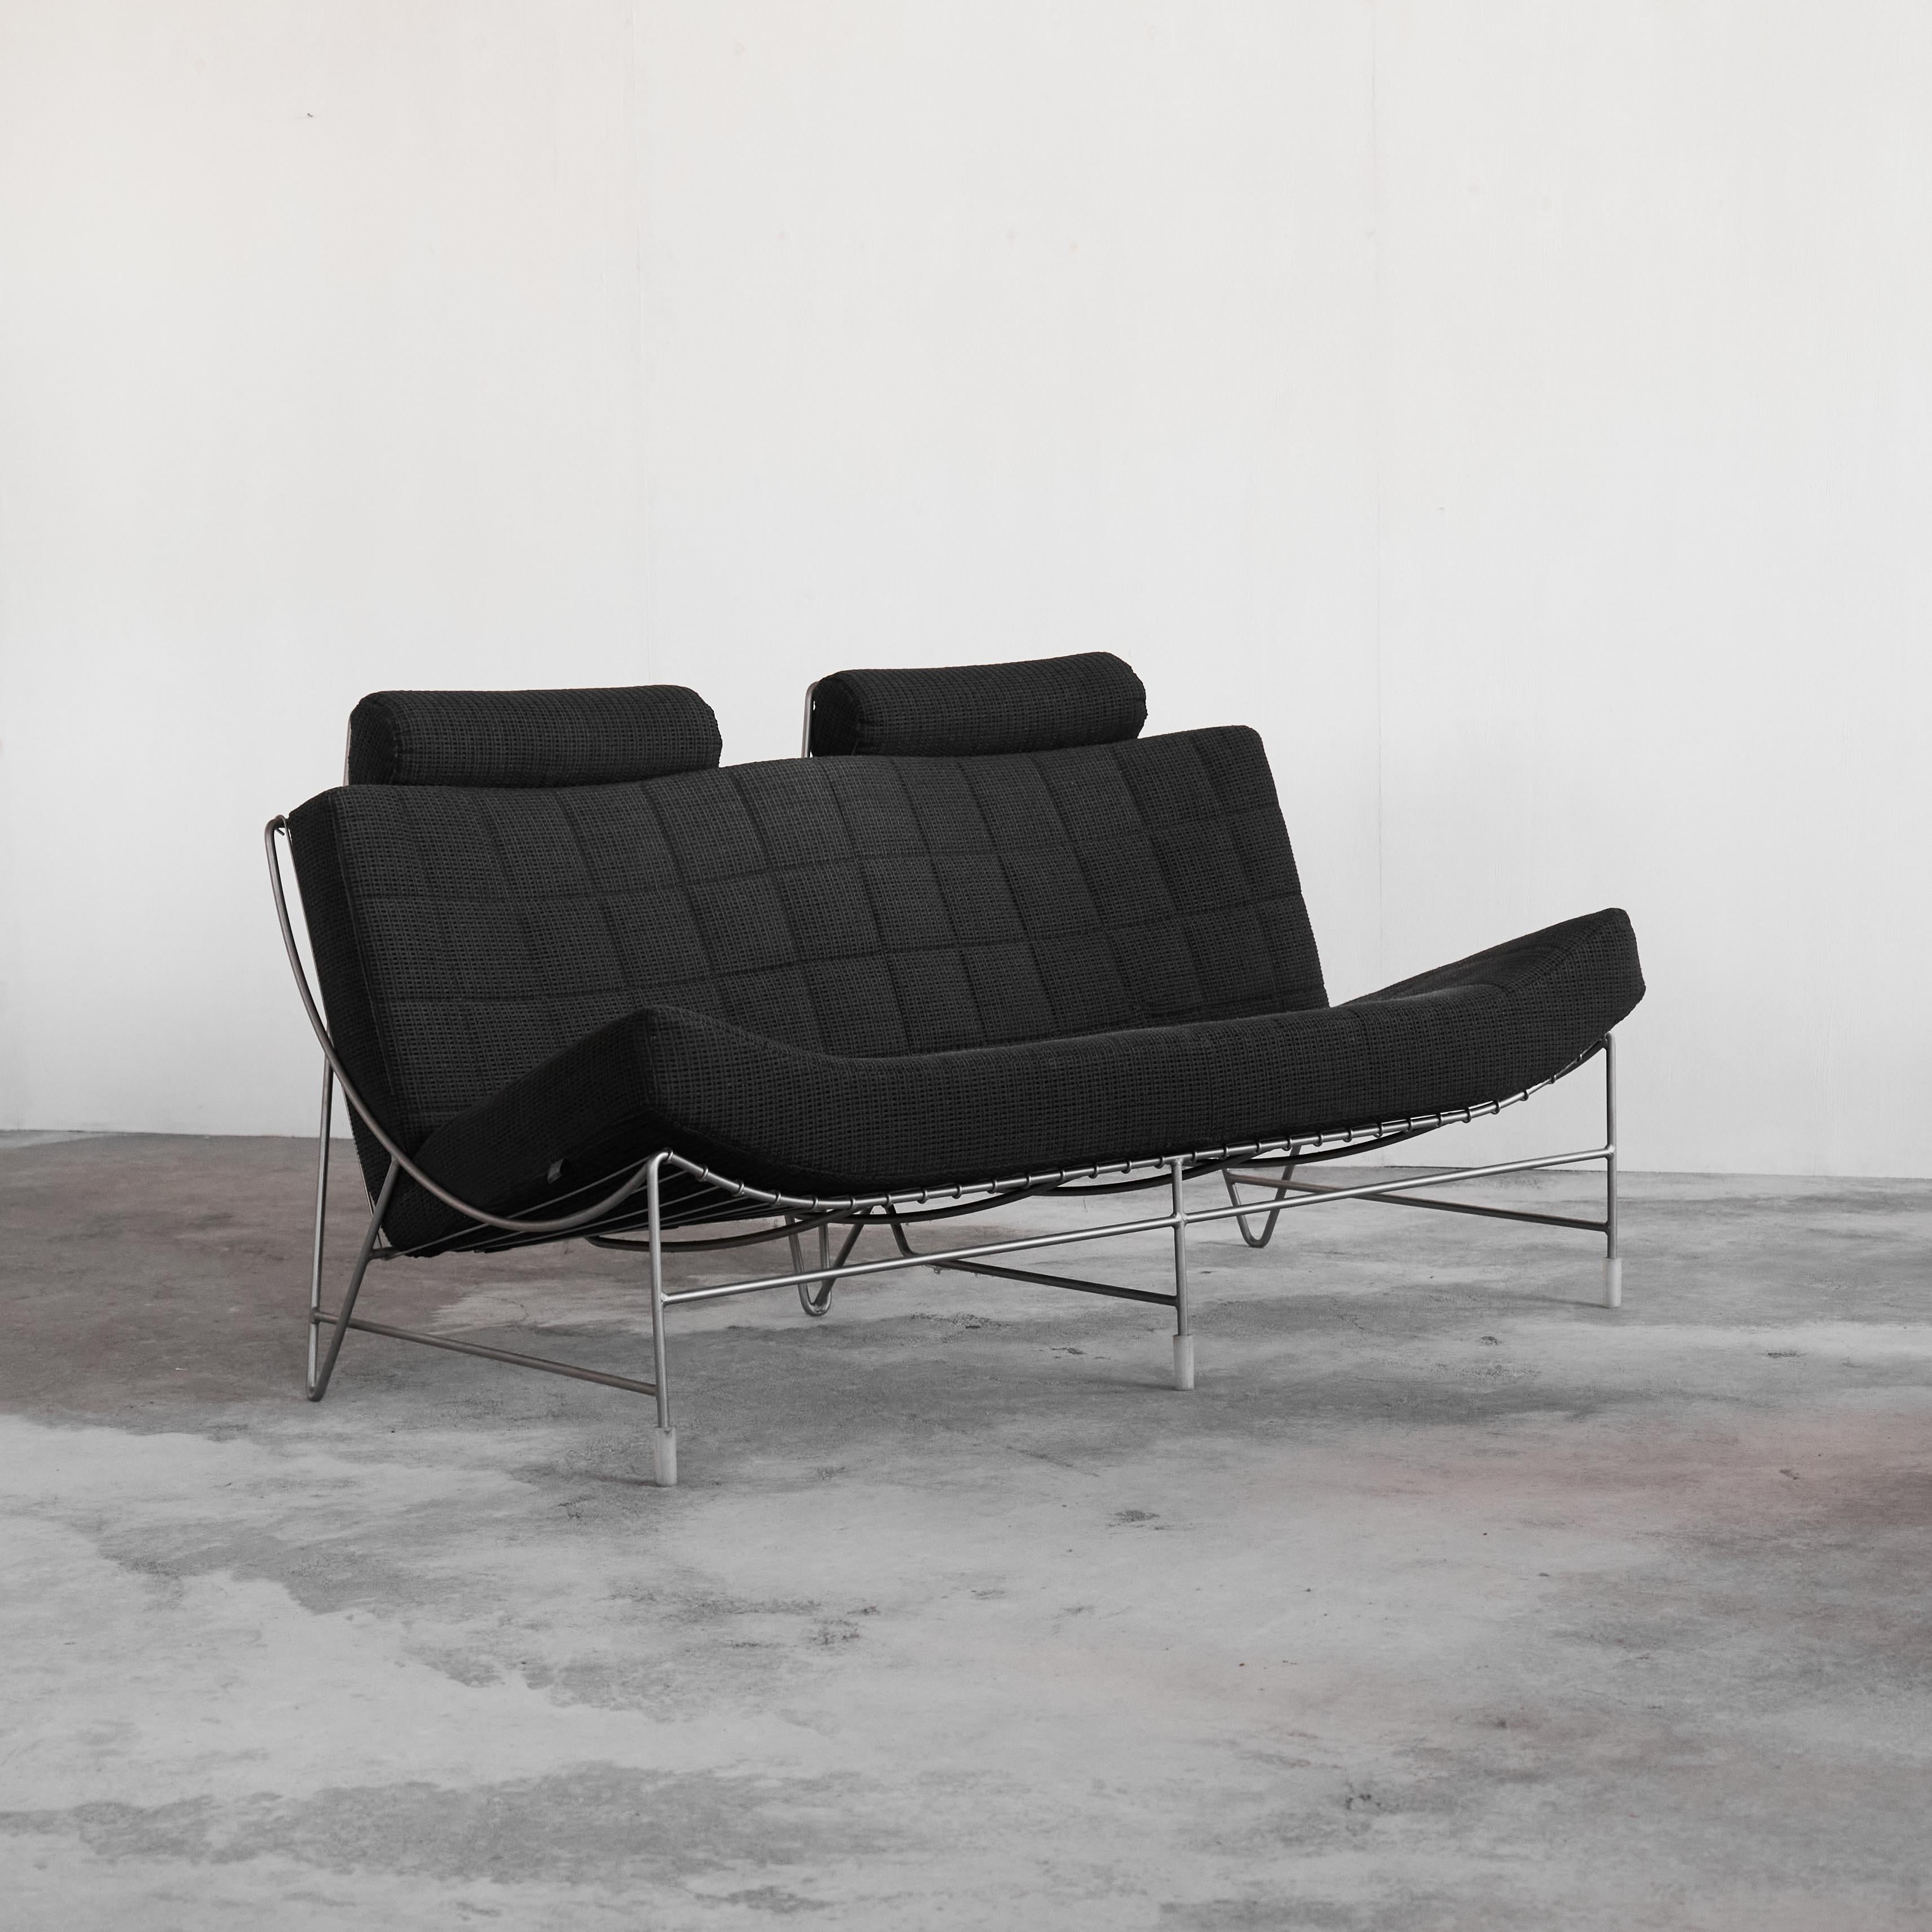 Jan Armgardt 'Volare' Two Seater Sofa for Leolux, The Netherlands, 1990s.

This wire frame sofa is one of the most interesting Leolux pieces, designed by renowned designer Jan Armgardt in 1998. Very comfortable and supporting due to the thick and